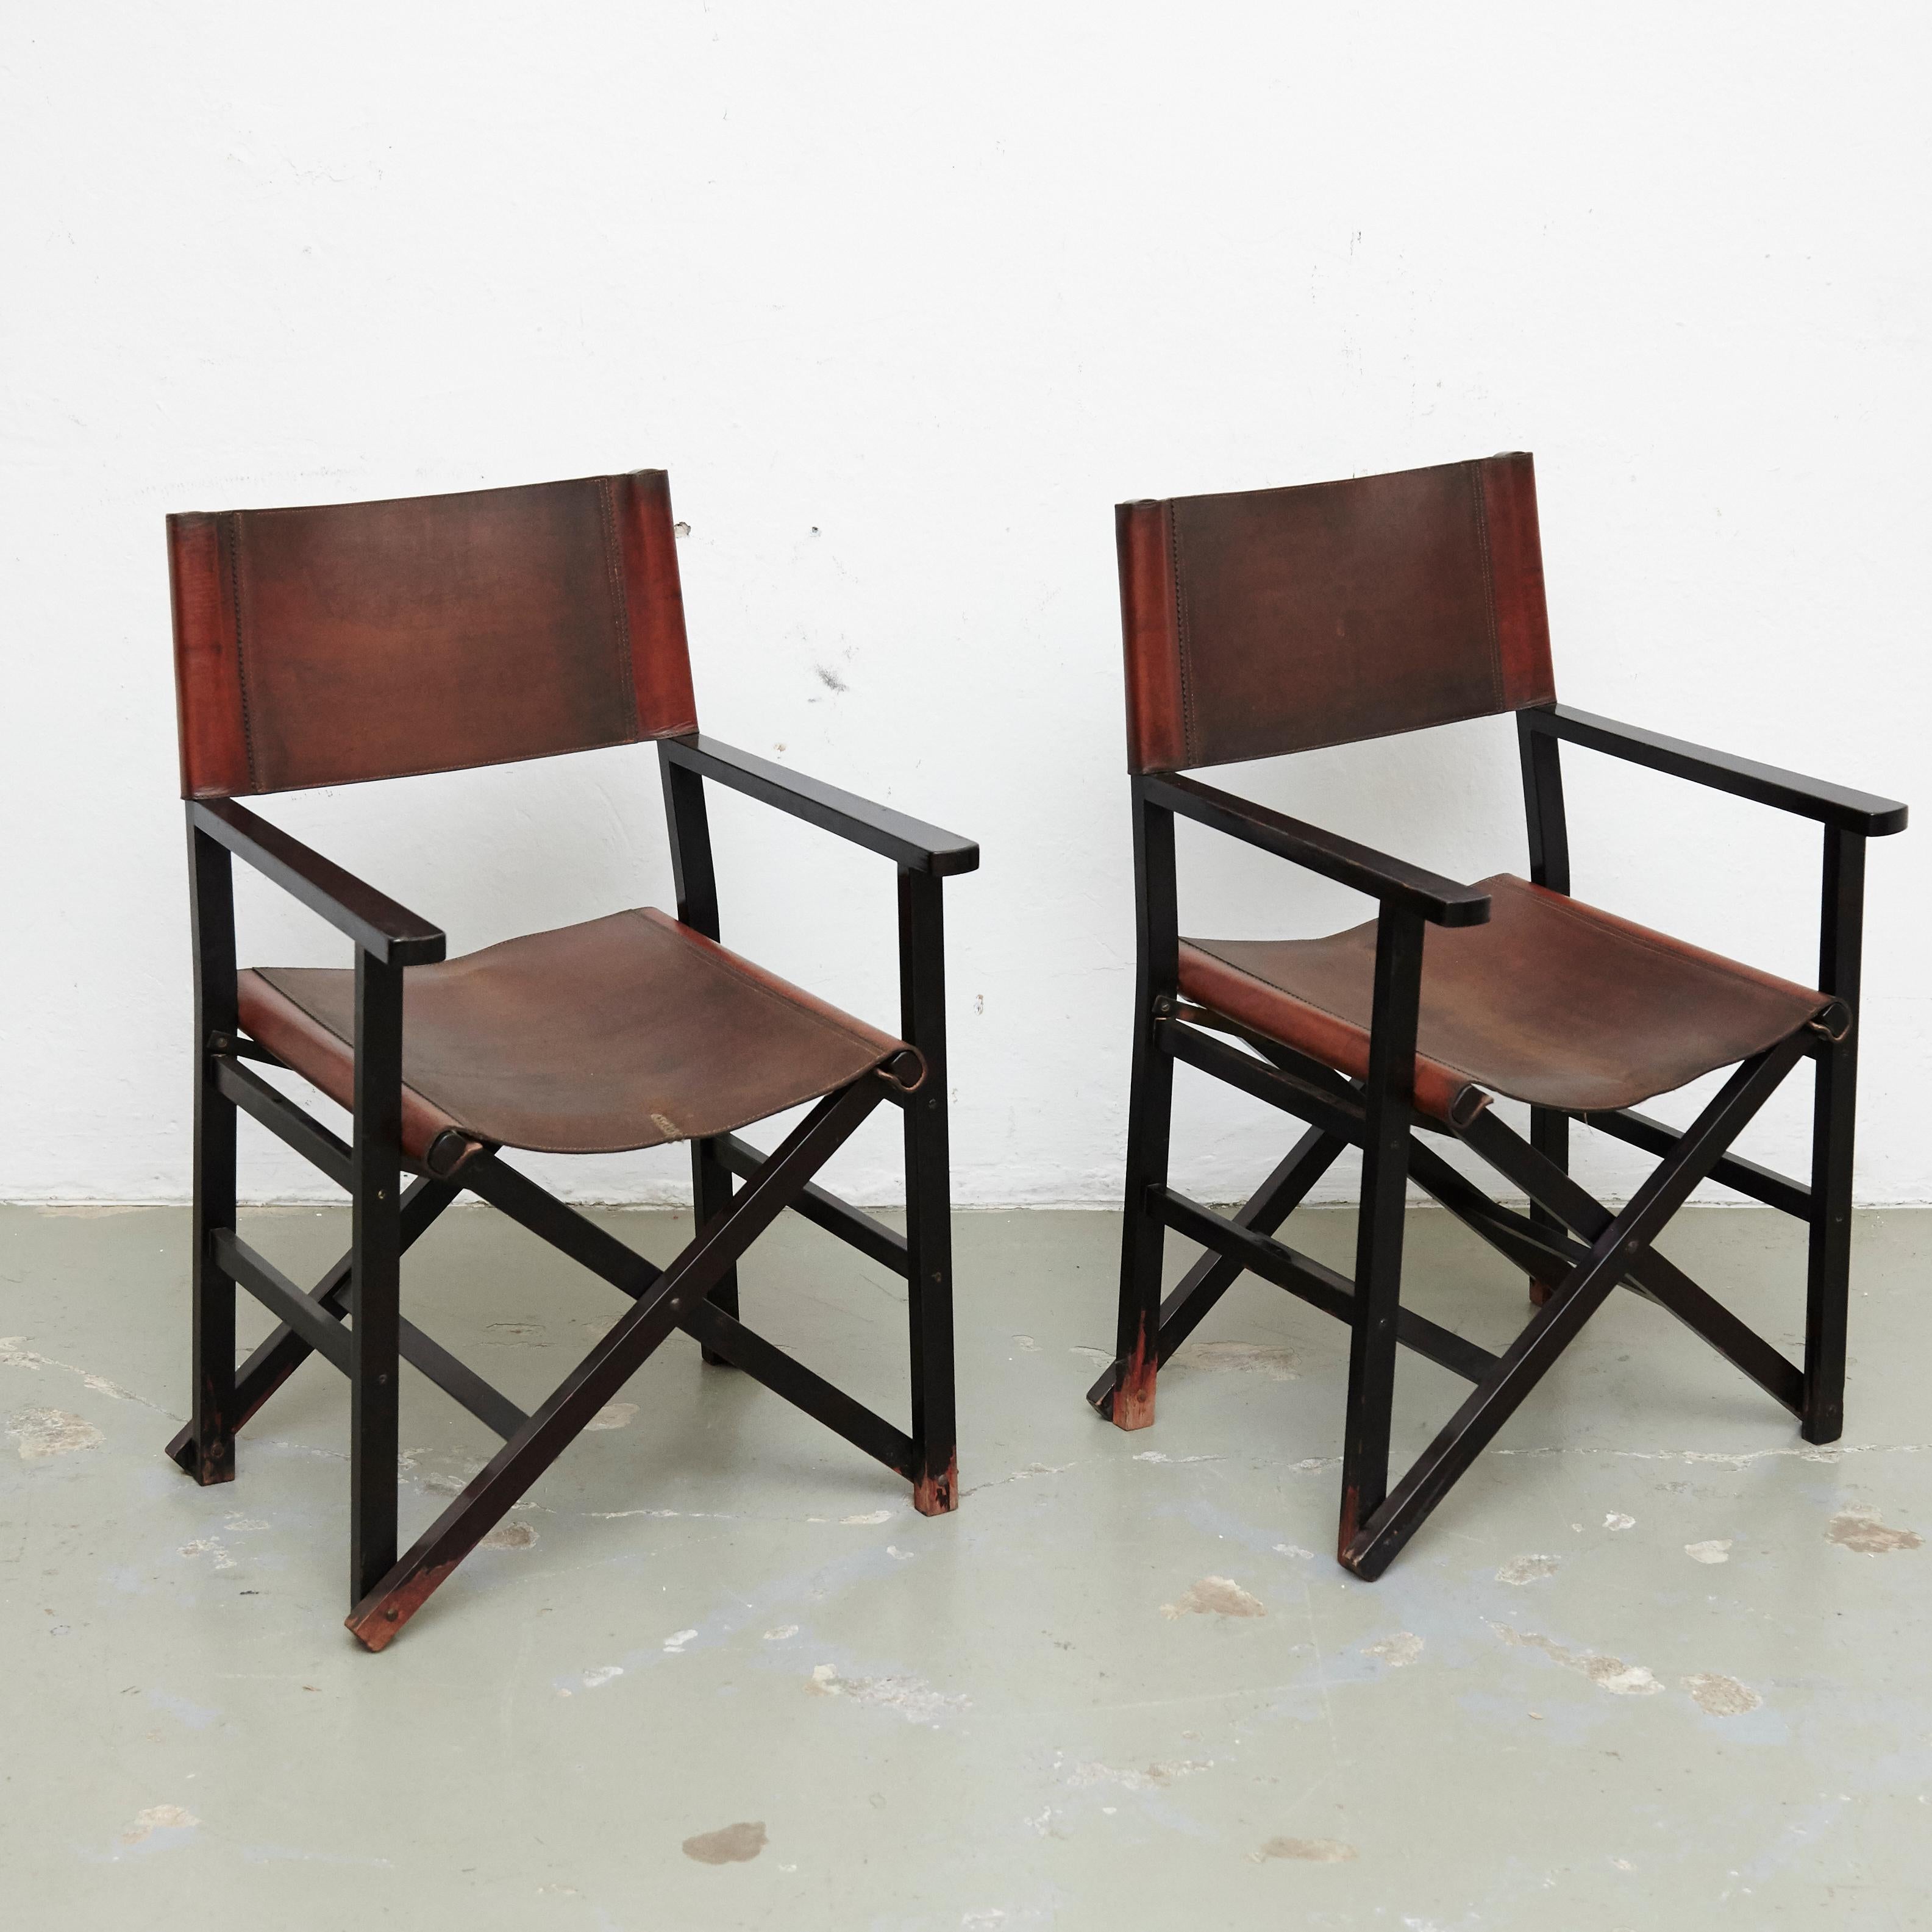 Set of four leather folding chairs designed by Miguel Mila.
Manufactured by Gres Edition, Spain, circa 1960. 

In good original condition, with minor wear consistent with age and use.

Materials and color:
Leather
Wood

Dimensions:
D 56 cm